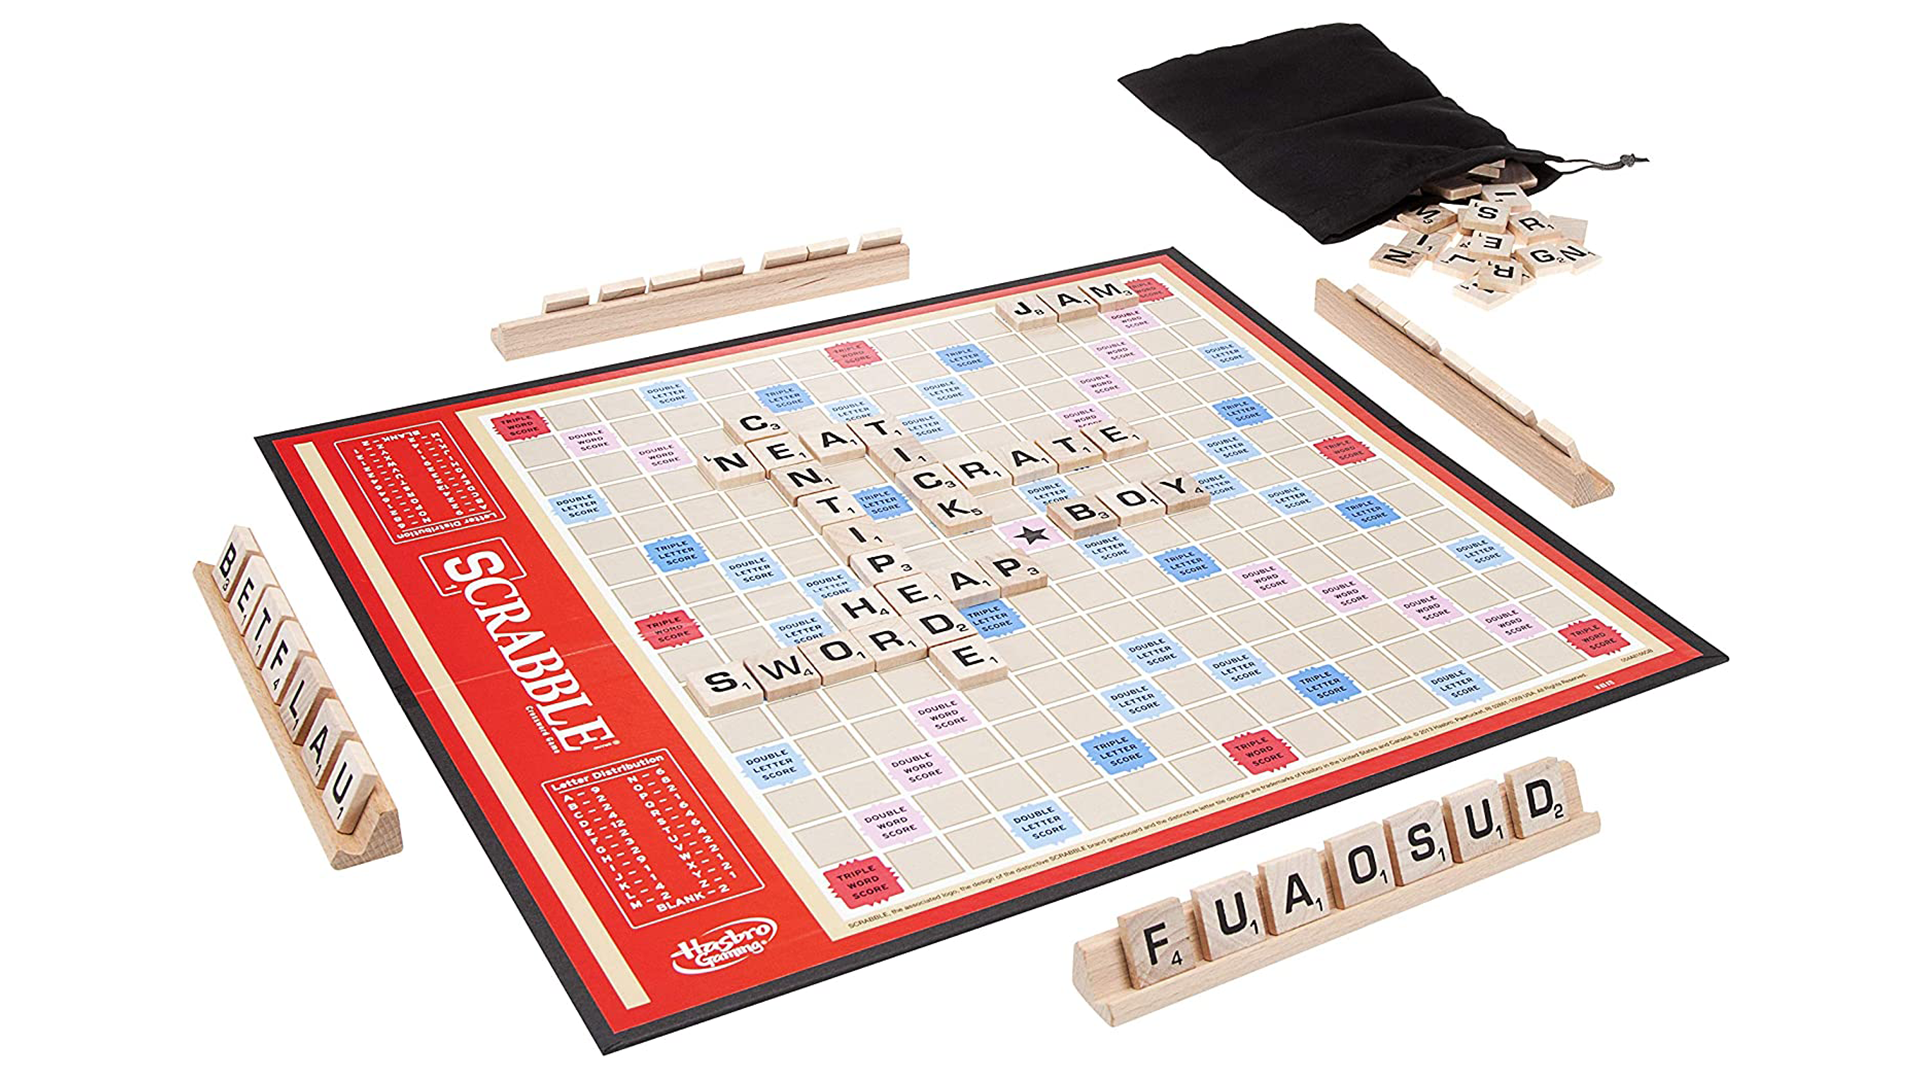 Scrabble board game with word tiles on display